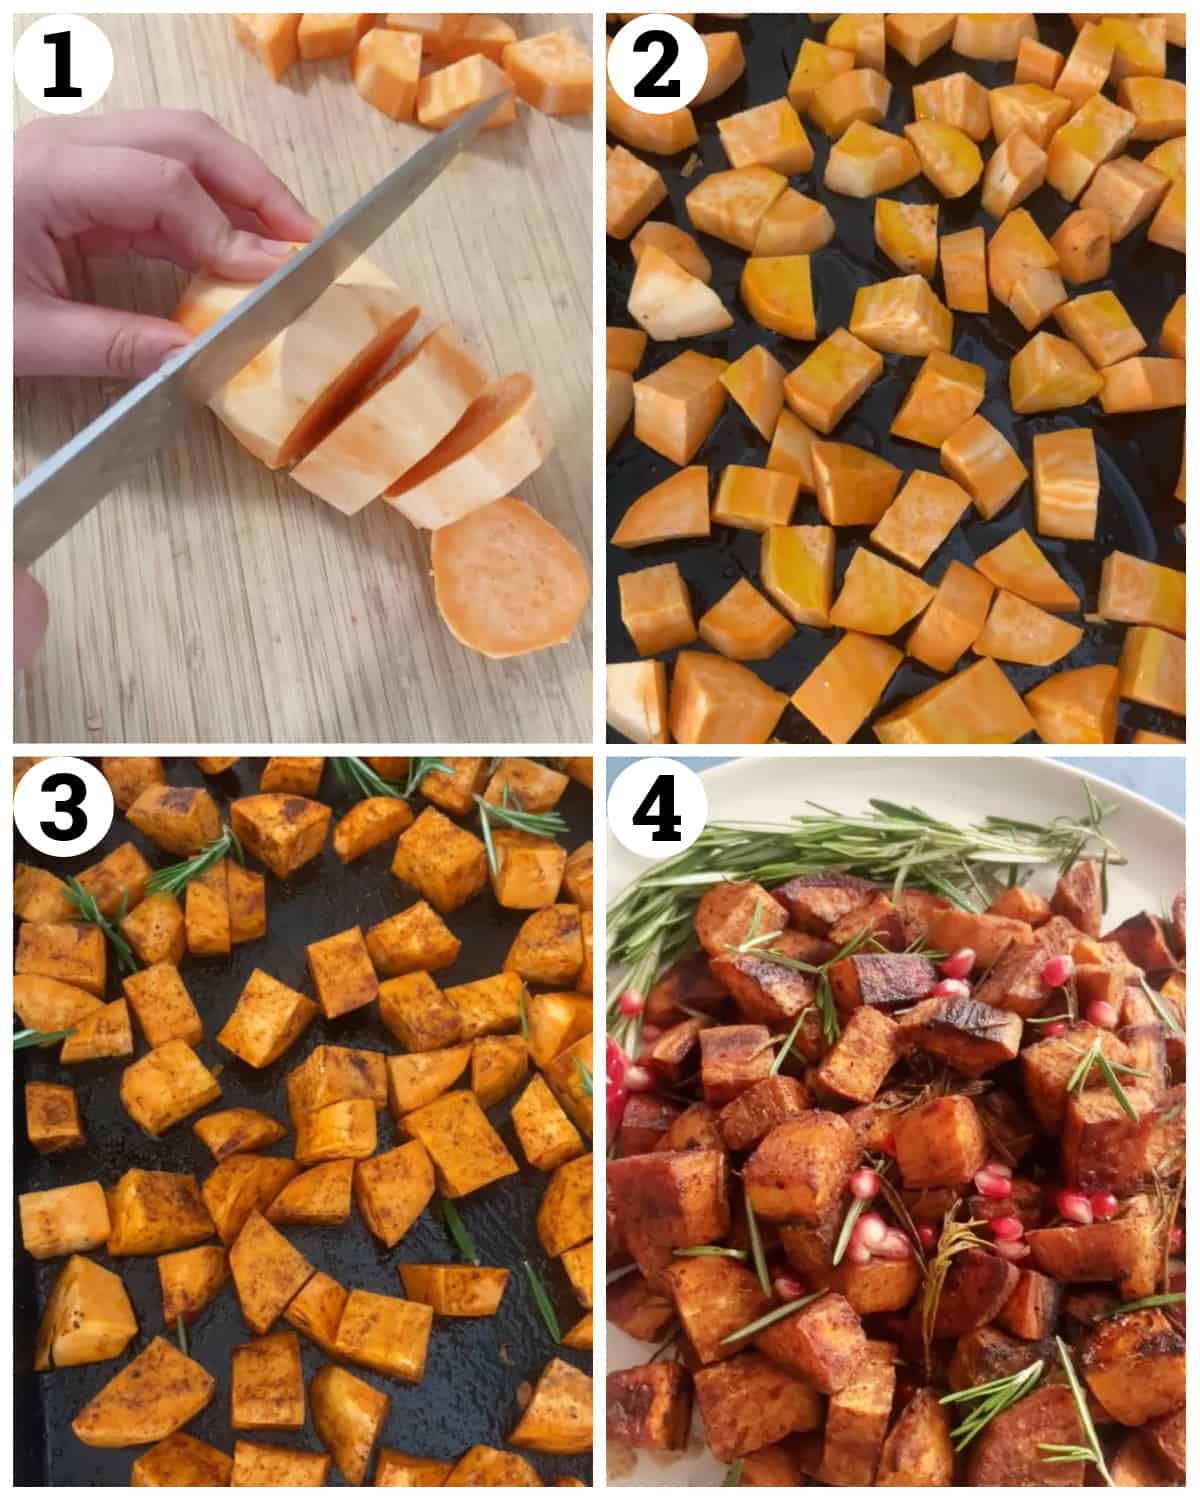 cut the potatoes into cubes then toss with olive oil and spices and roast in the oven. 